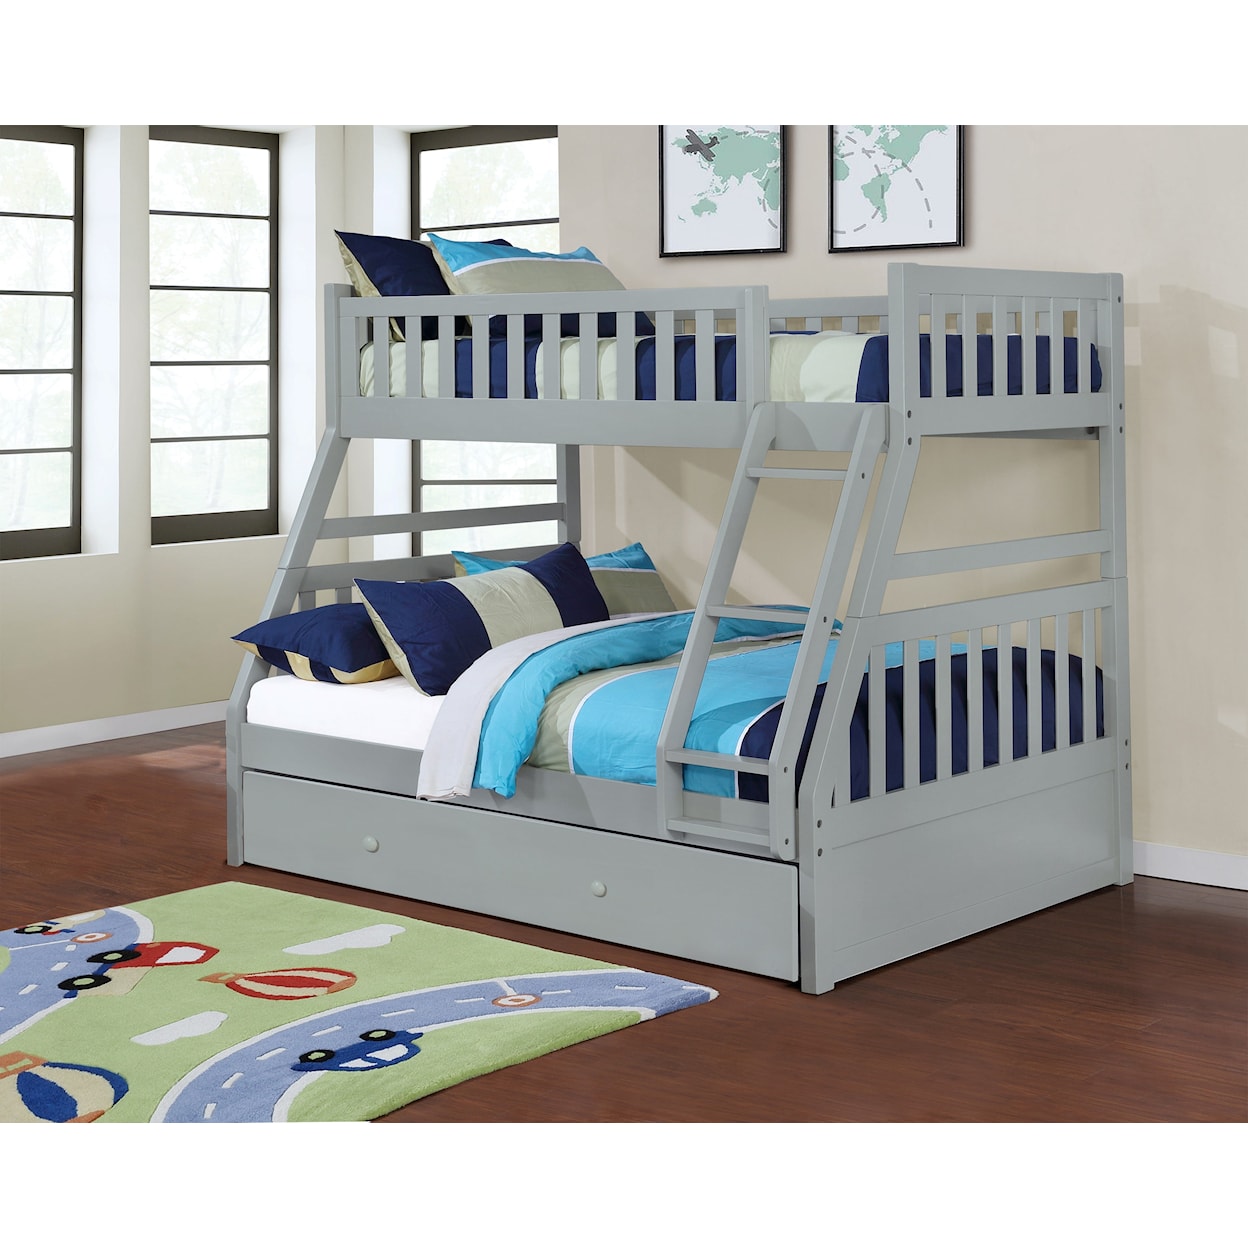 Lifestyle B803G Bunk Bed with Trundle Drawer